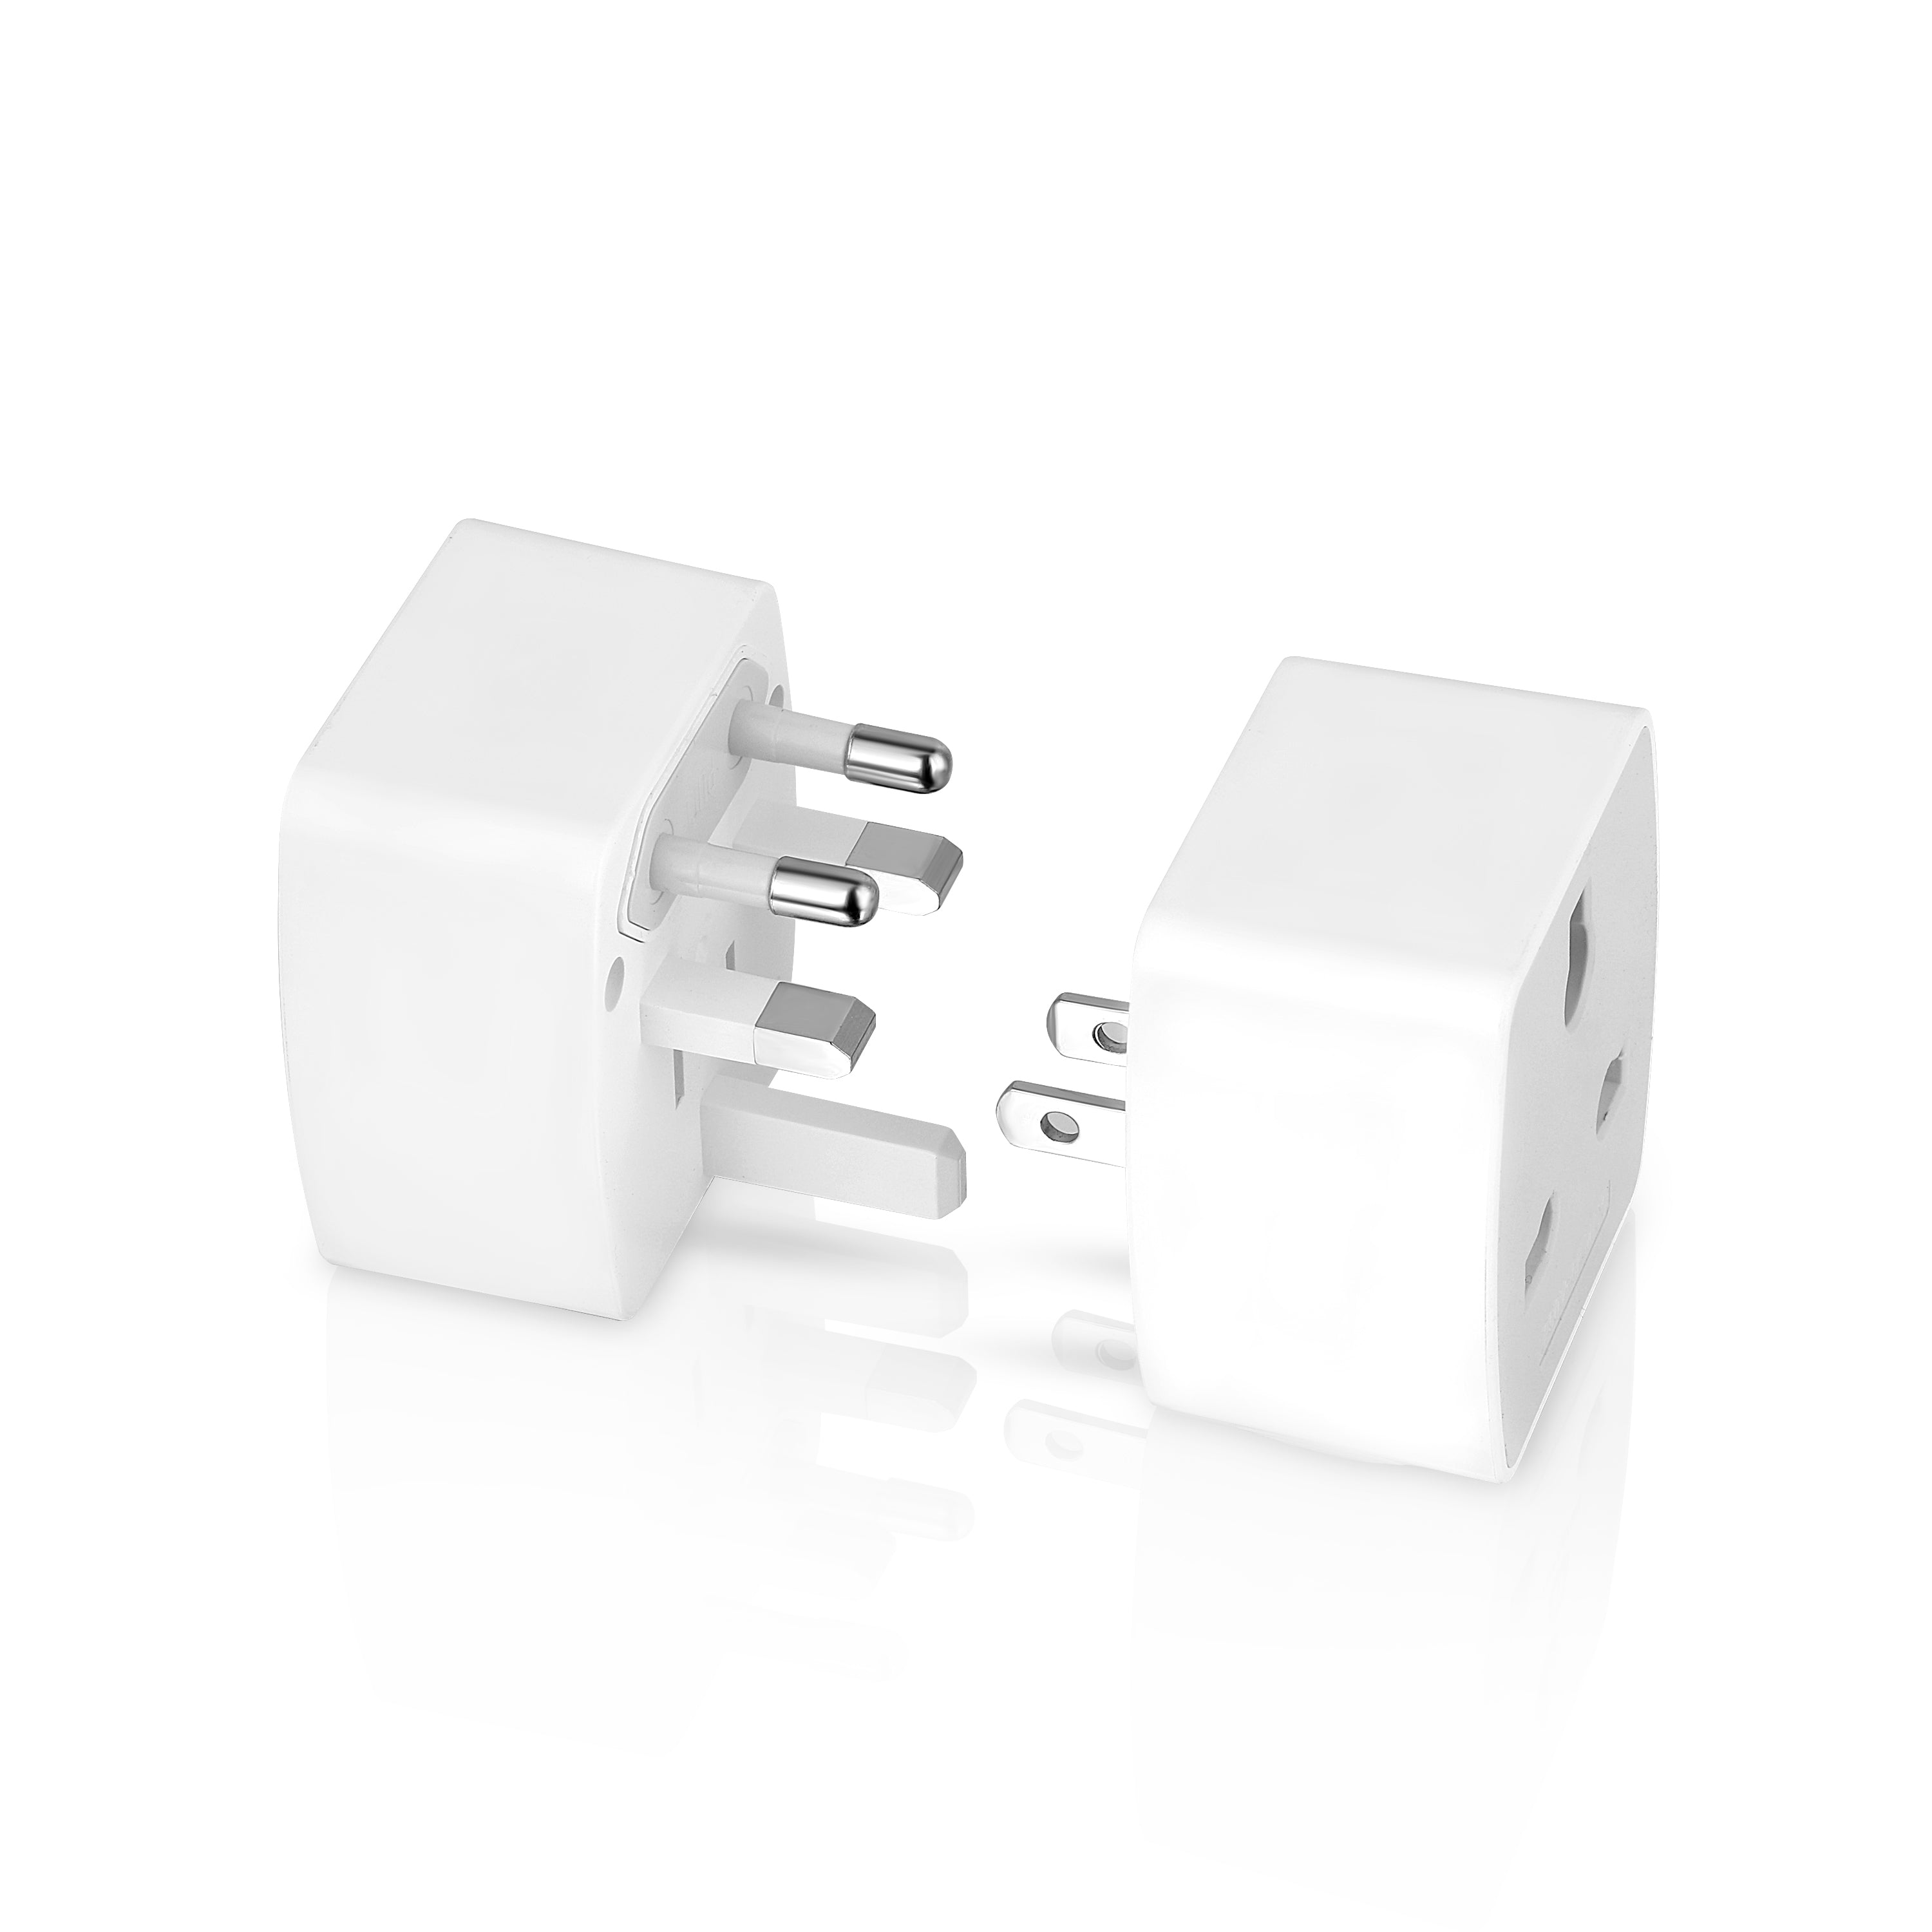 SOLO 4(100-250V,6A) MOBILE CHARGER  (WHITE)